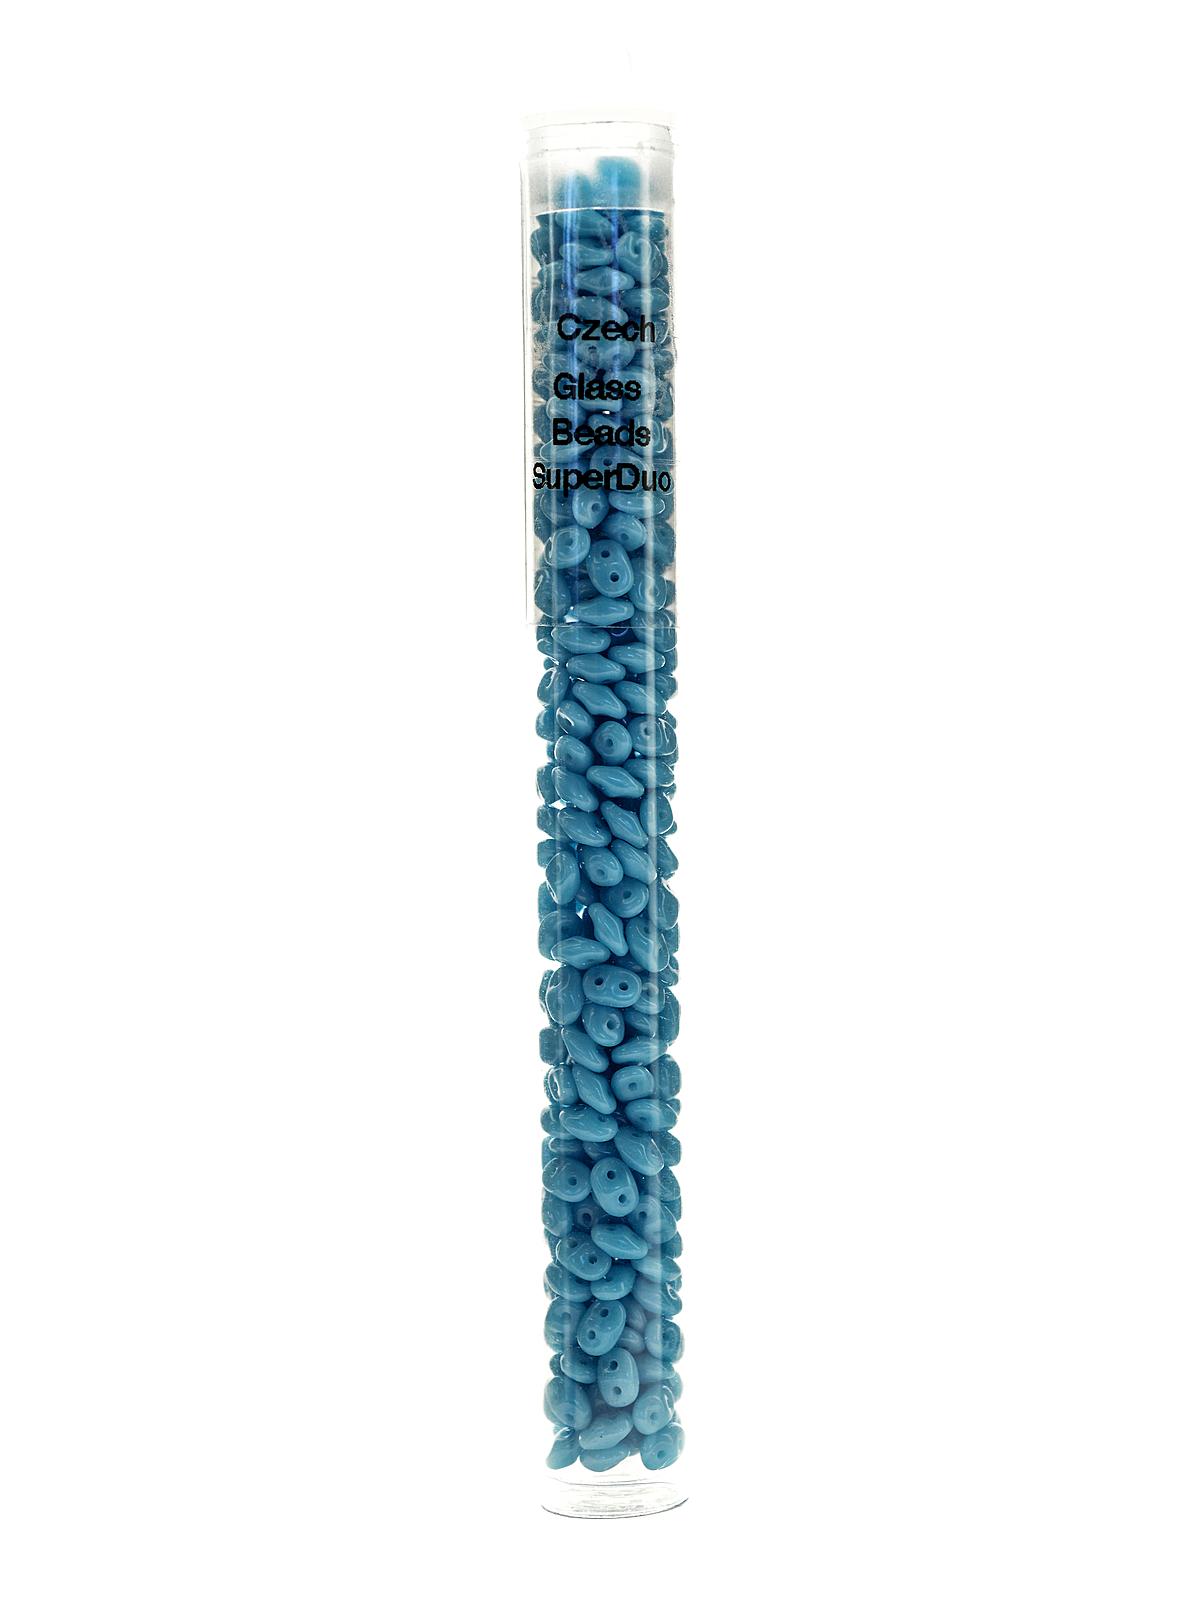 Super Duo Beads Turquoise Blue 2.5 Mm X 5 Mm 24 Gm Tube